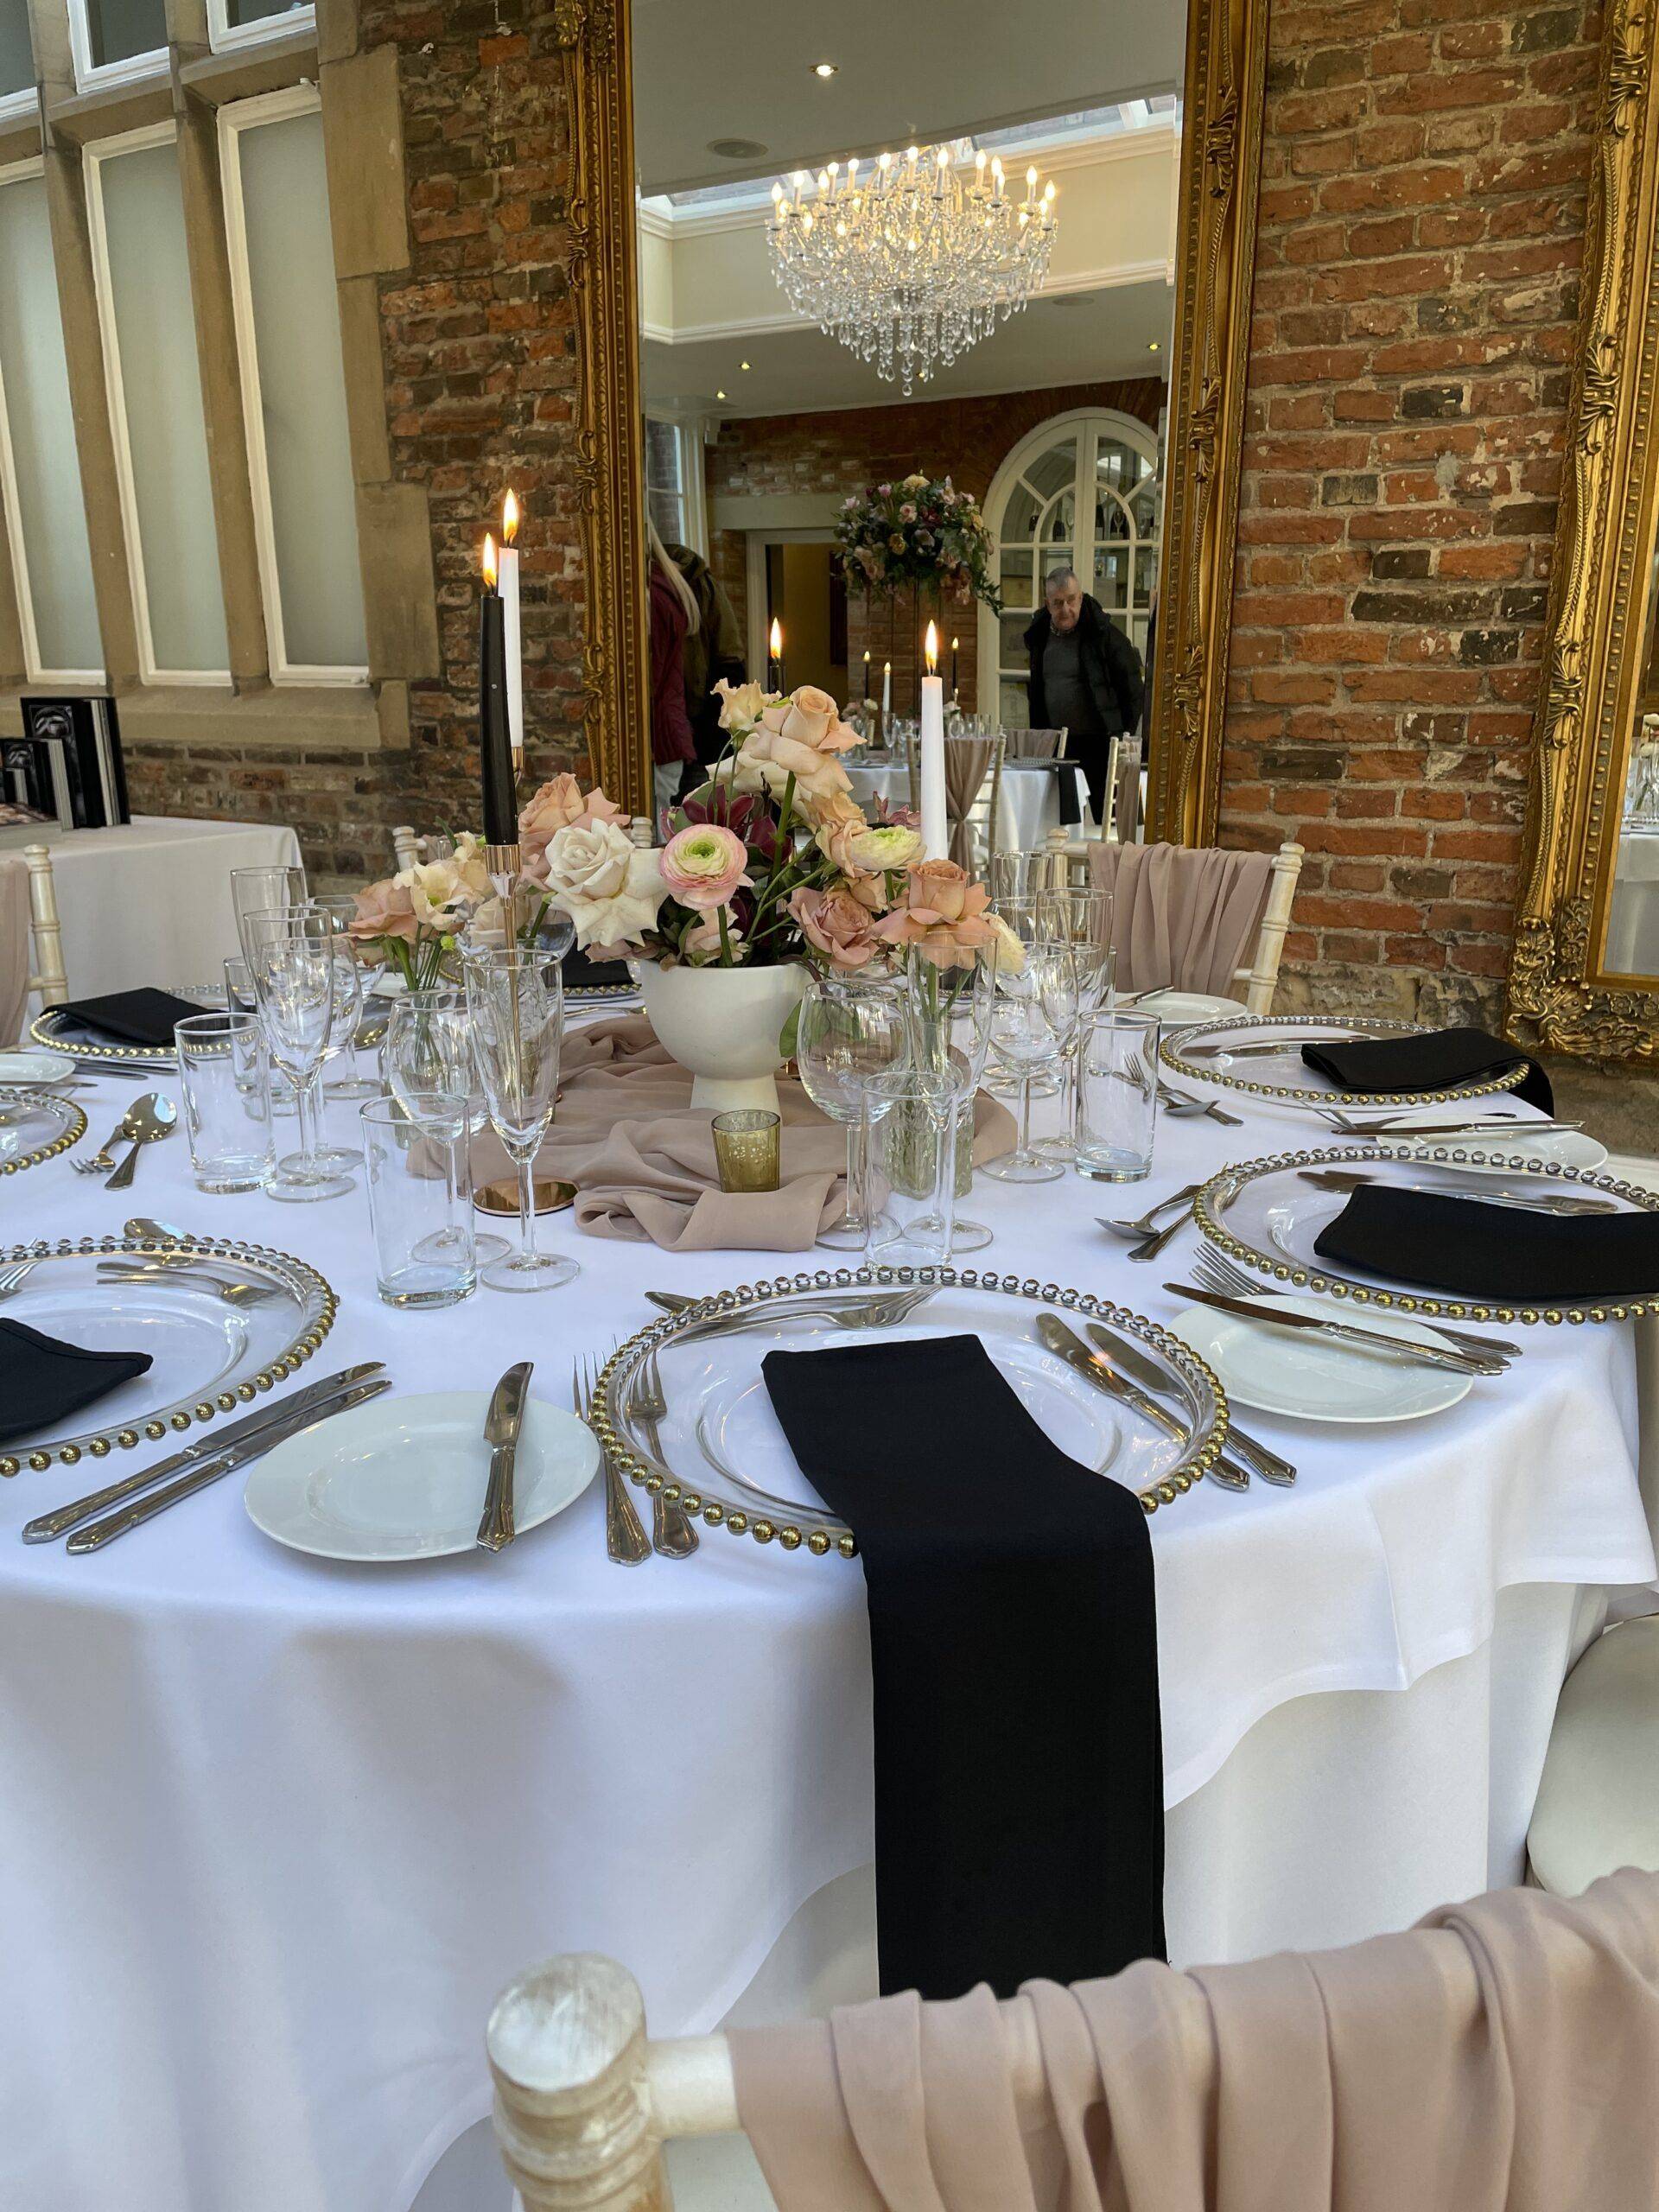 a table set for a formal dinner with flowers and candles.